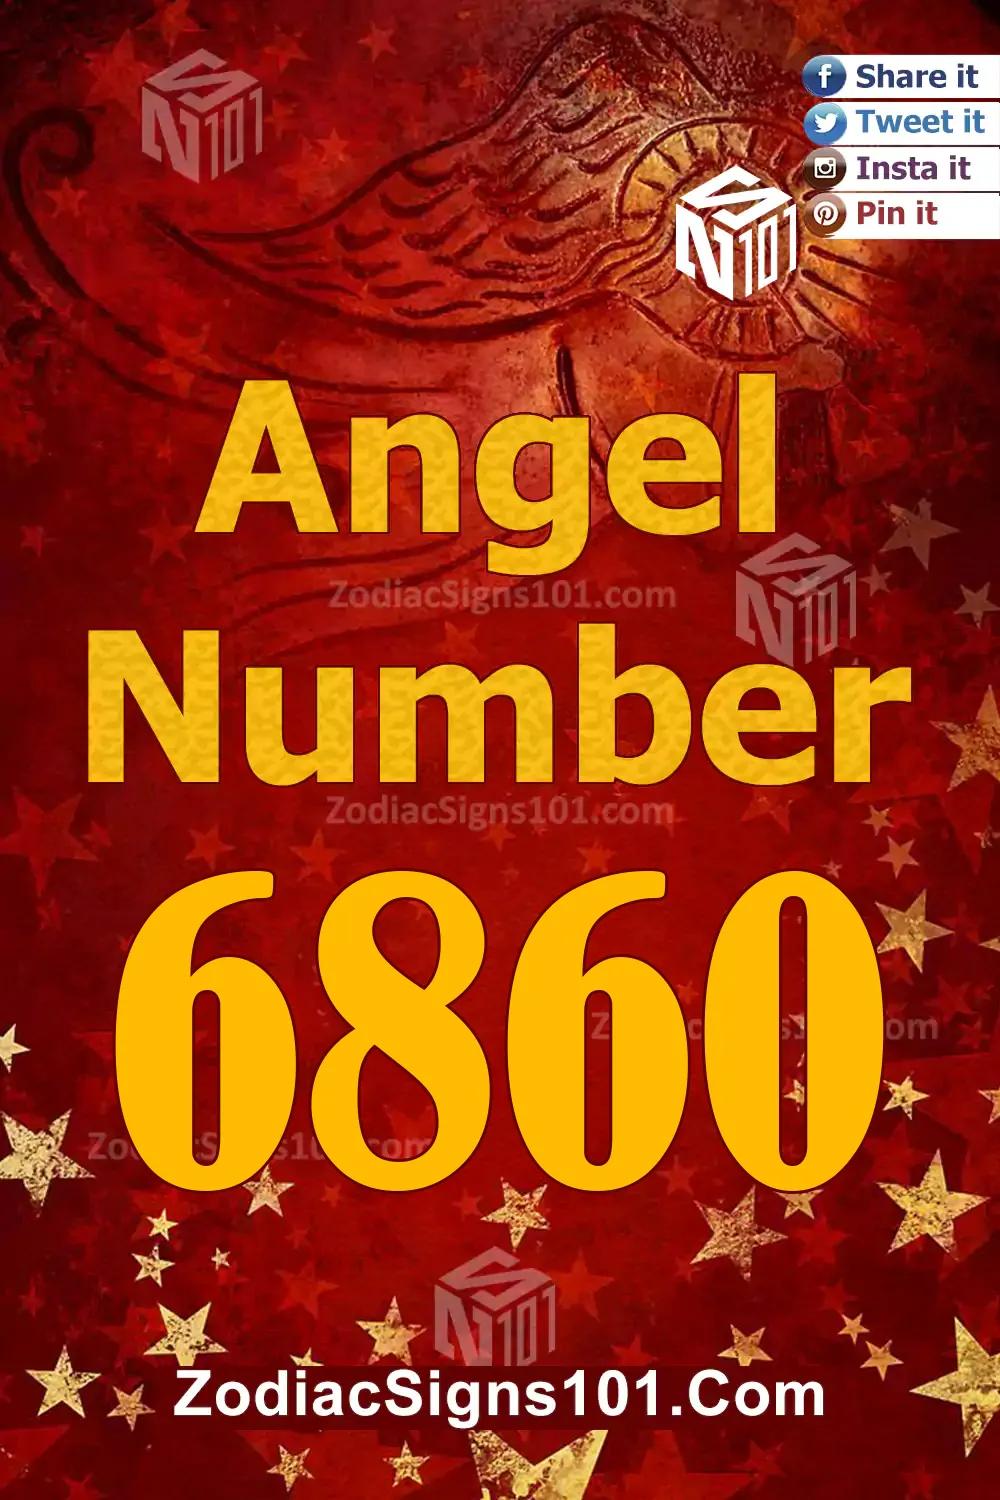 6860 Angel Number Meaning